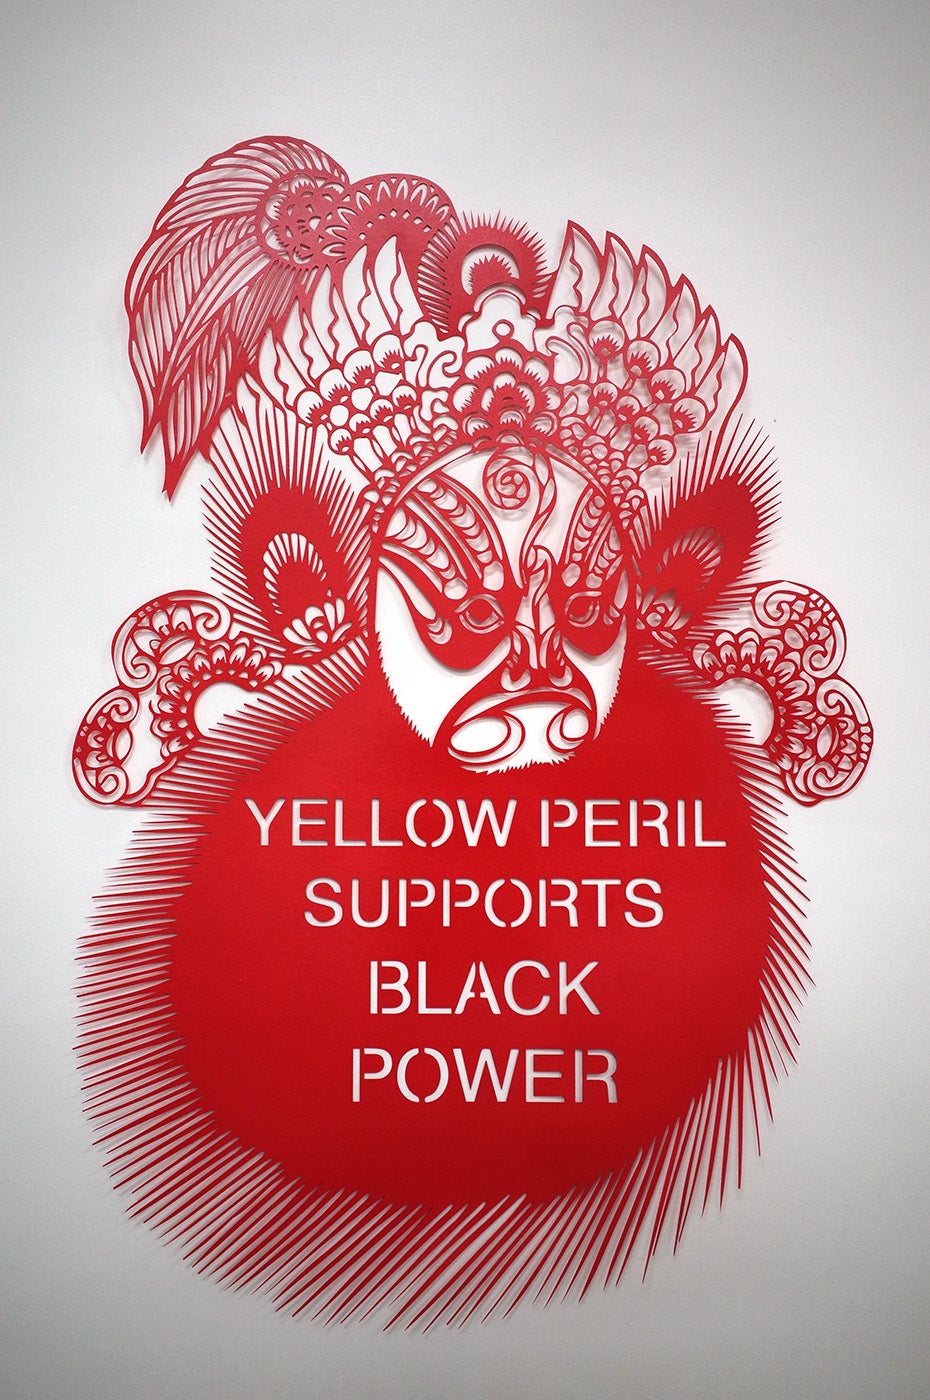 Paper cutting that says "YELLOW PERIL SUPPORTS BLACK POWER"